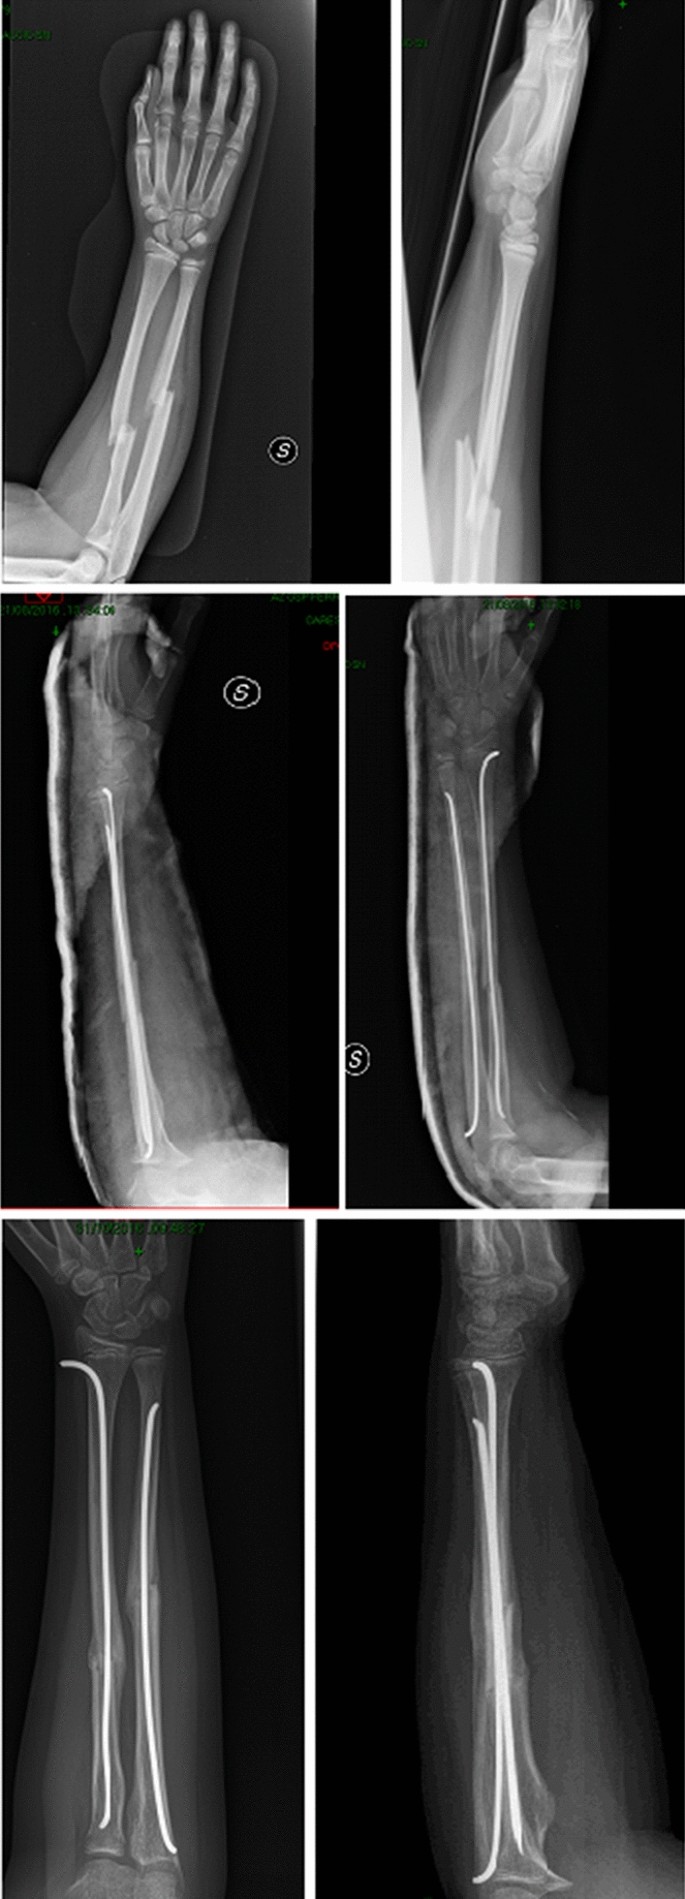 Implant removal associated complications after ESIN osteosynthesis in  pediatric fractures | European Journal of Trauma and Emergency Surgery